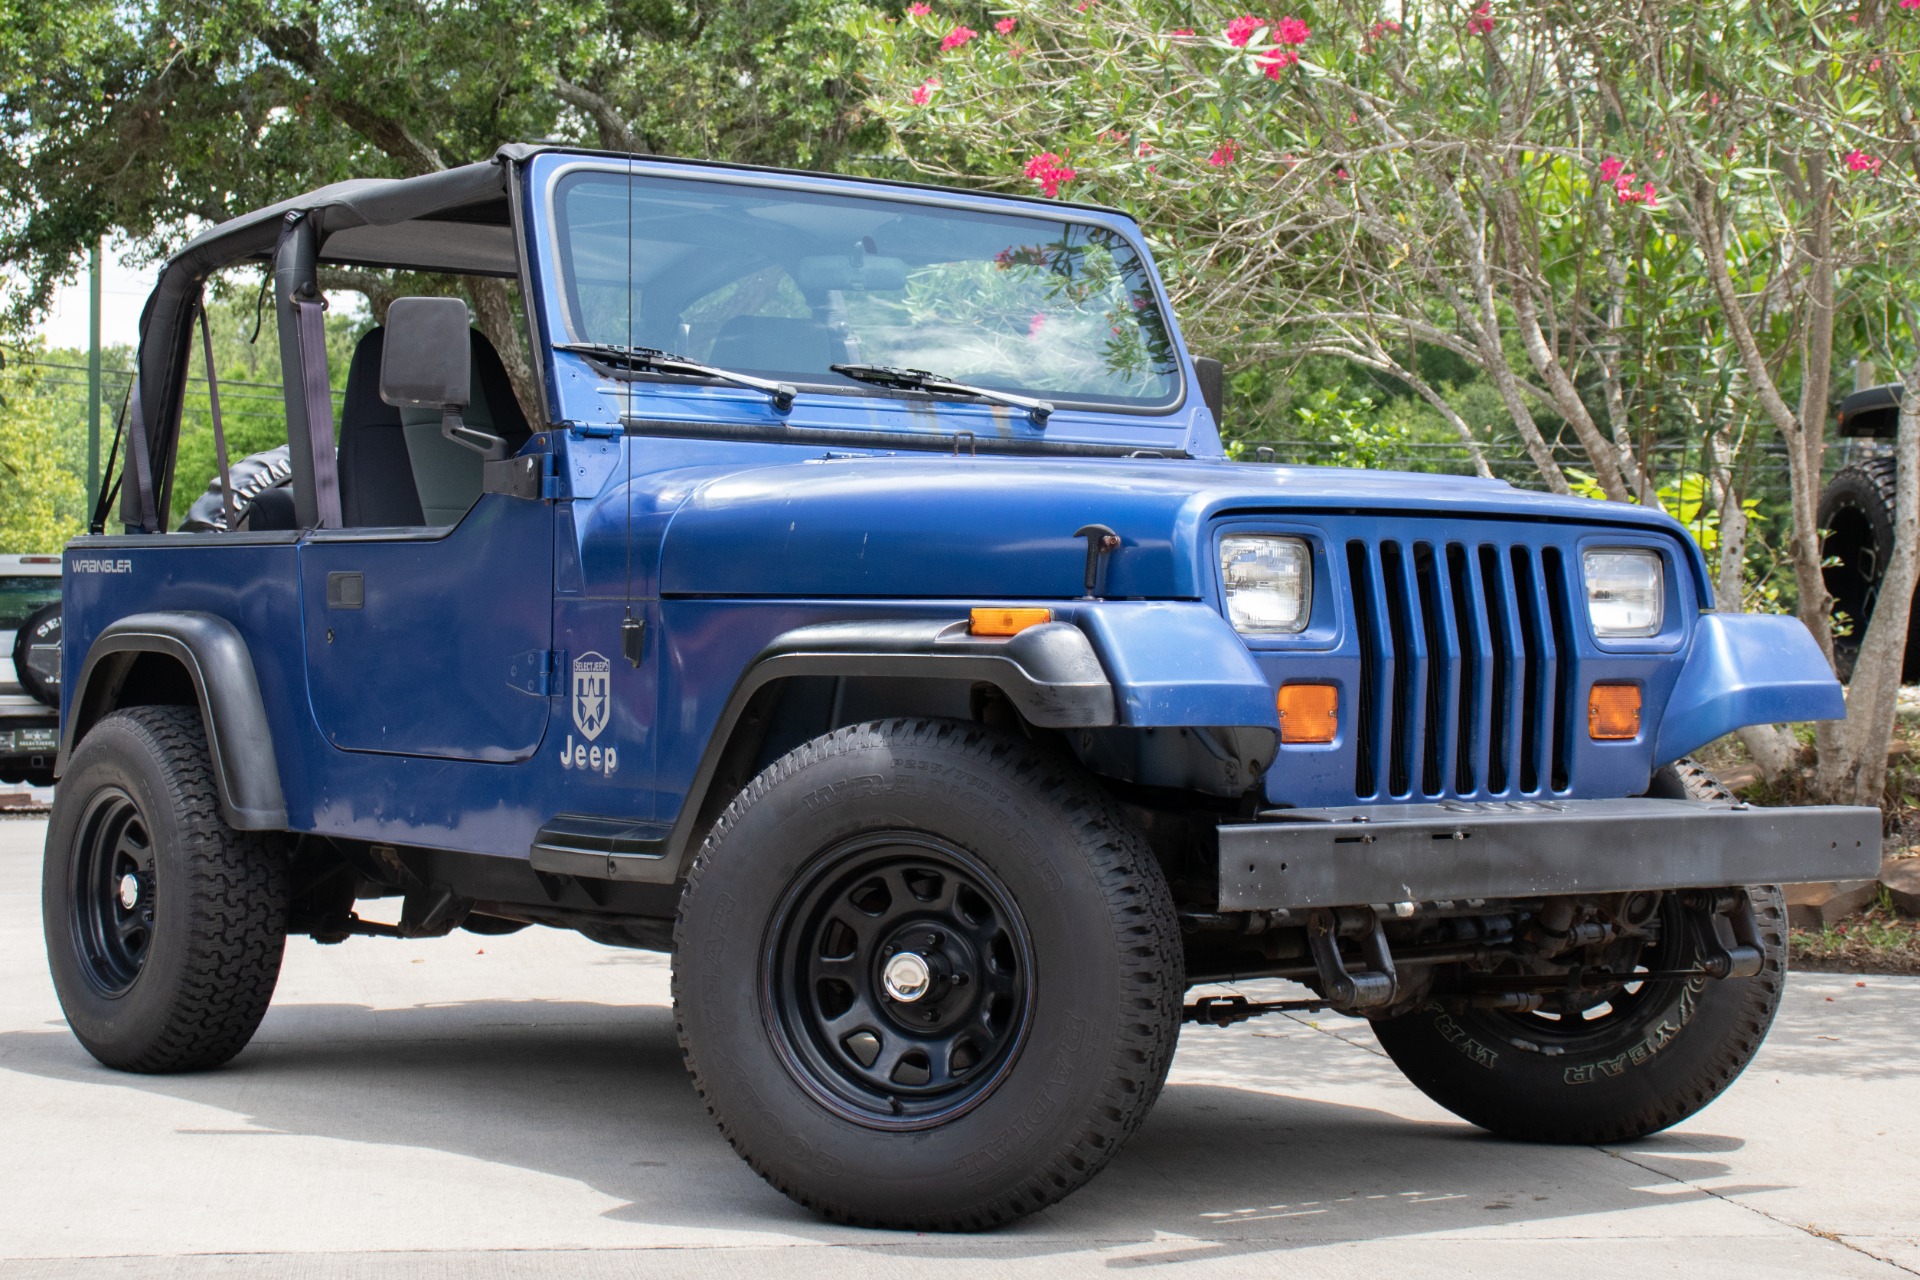 Used 1994 Jeep Wrangler S For Sale ($6,995) | Select Jeeps Inc. Stock  #423078